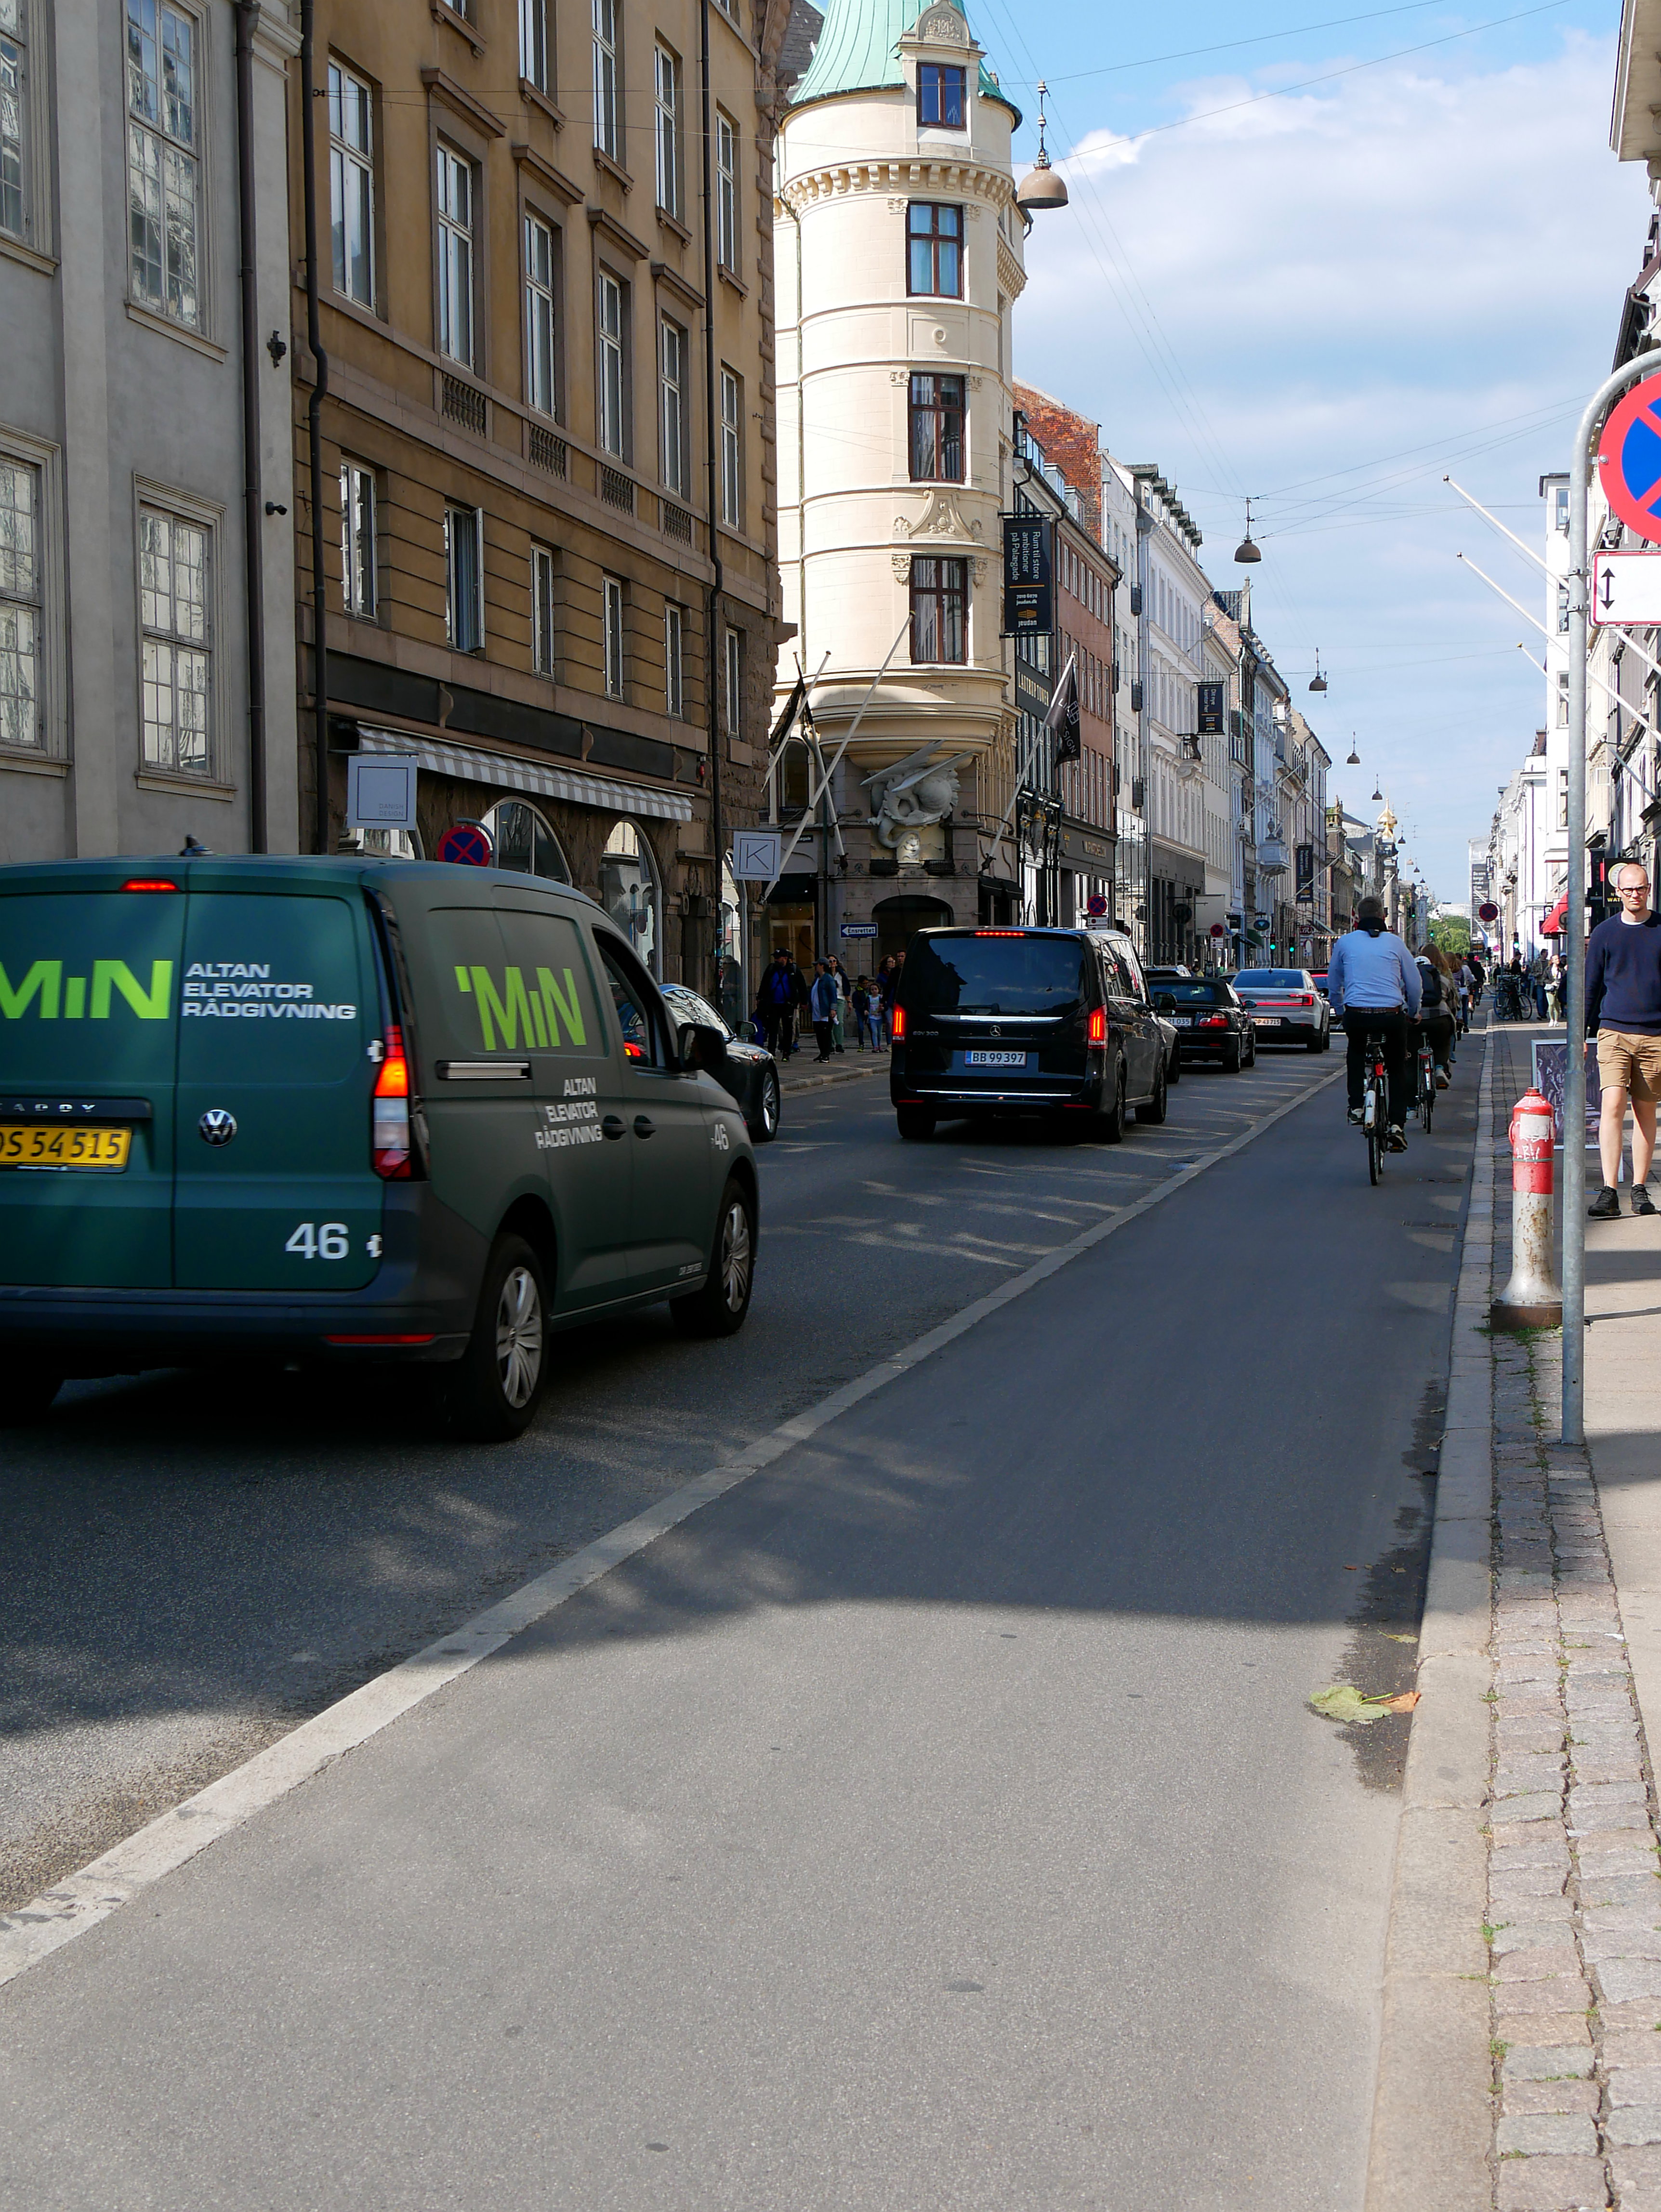 Speed limits will be reduced several places in Copenhagen